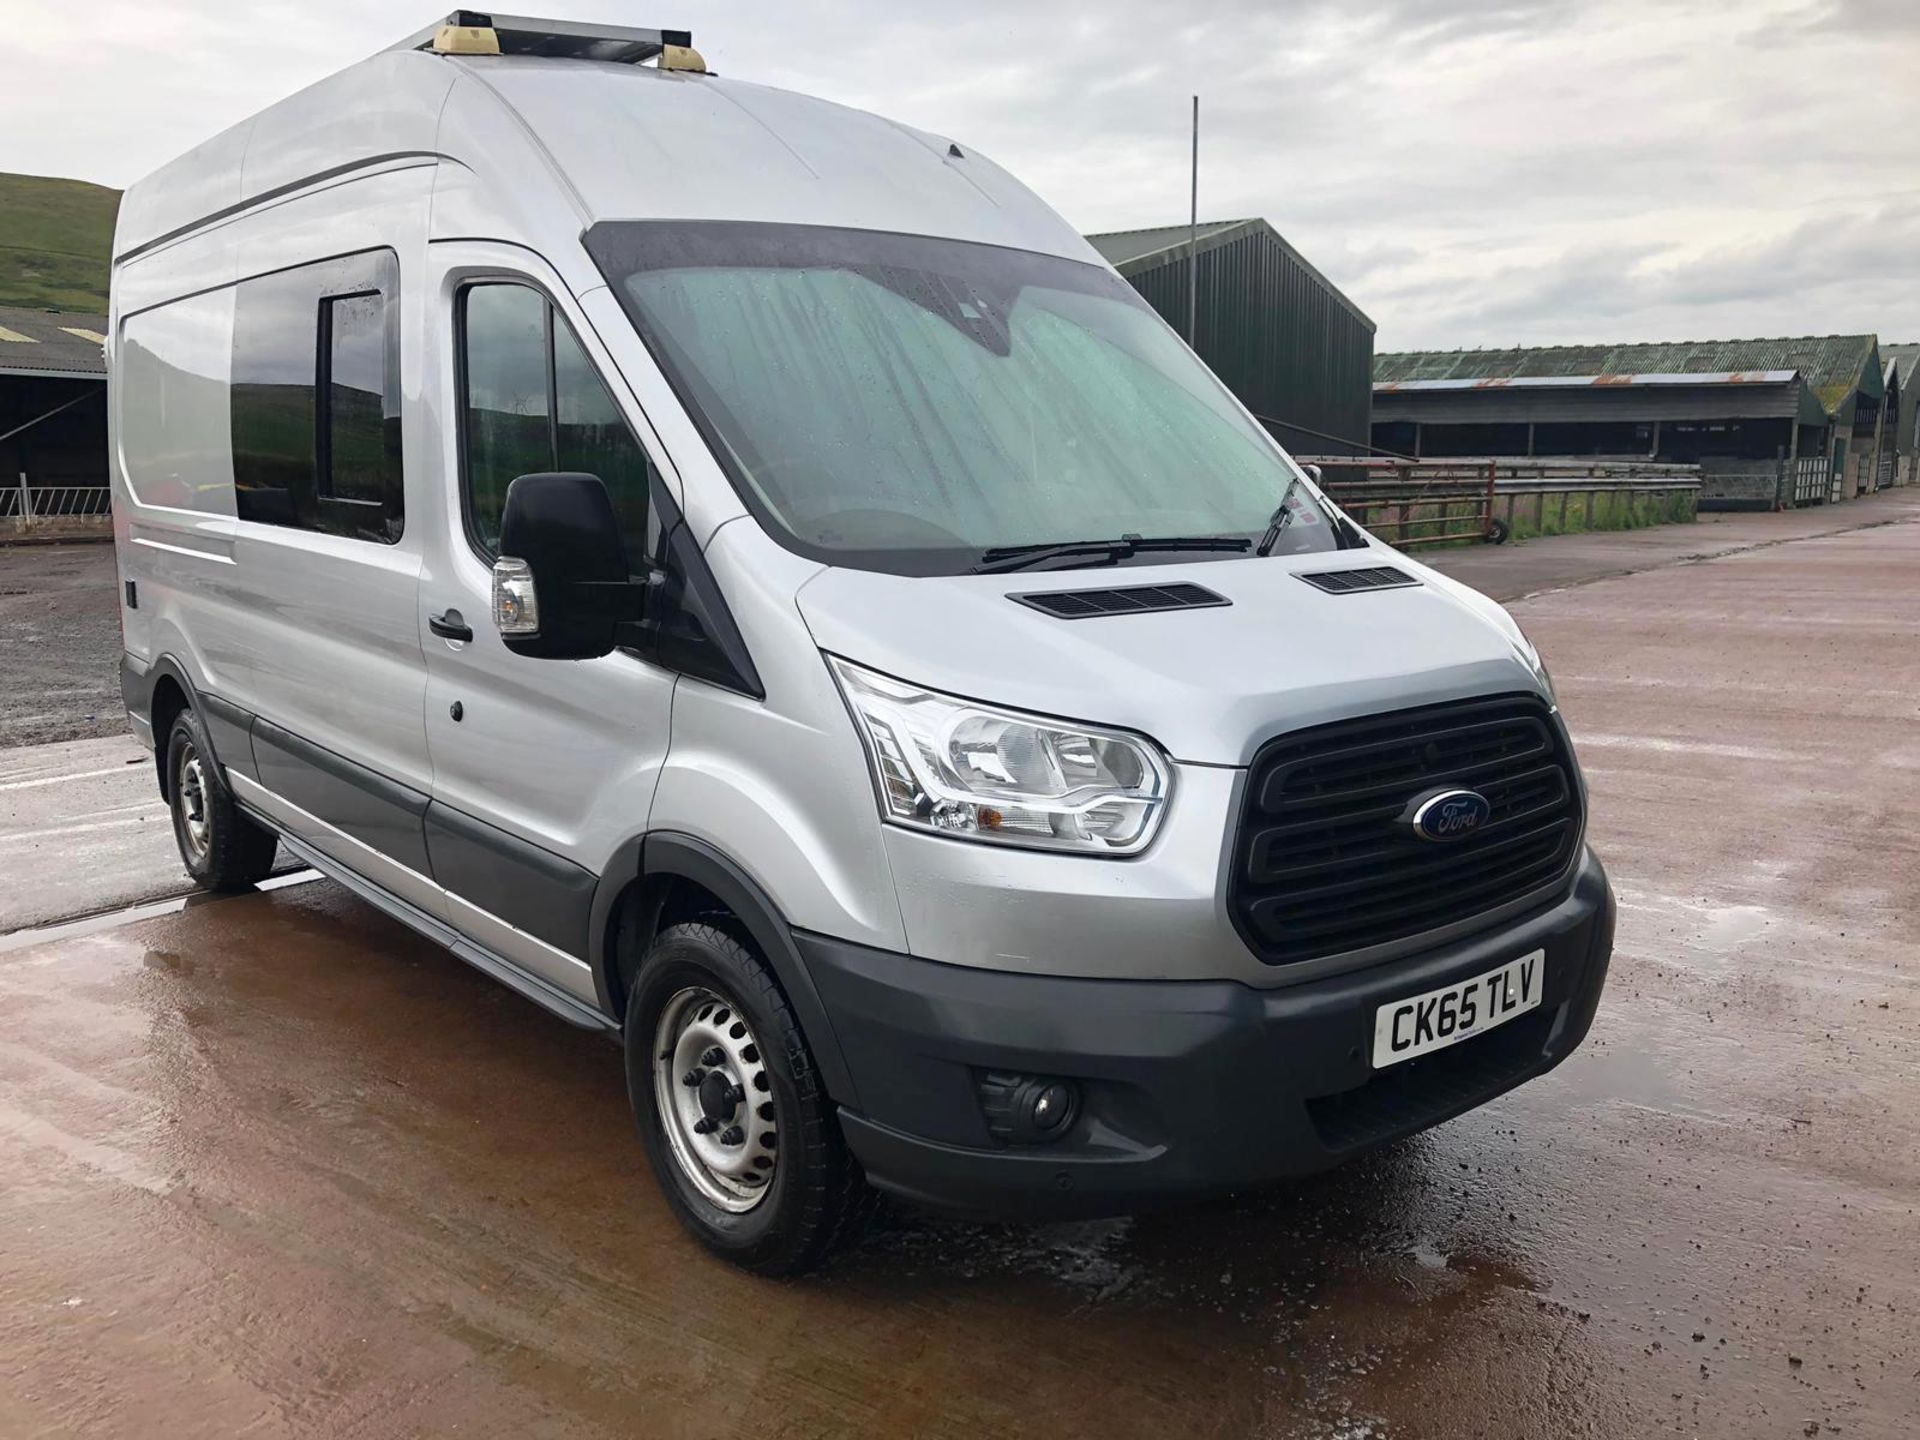 Extra Lot - Ford TRANSIT 350 2.2 TDCi 155PS EURO 5 FOUR WHEEL DRIVE HIGH ROOF UNIQUE TRAVELLING WORK